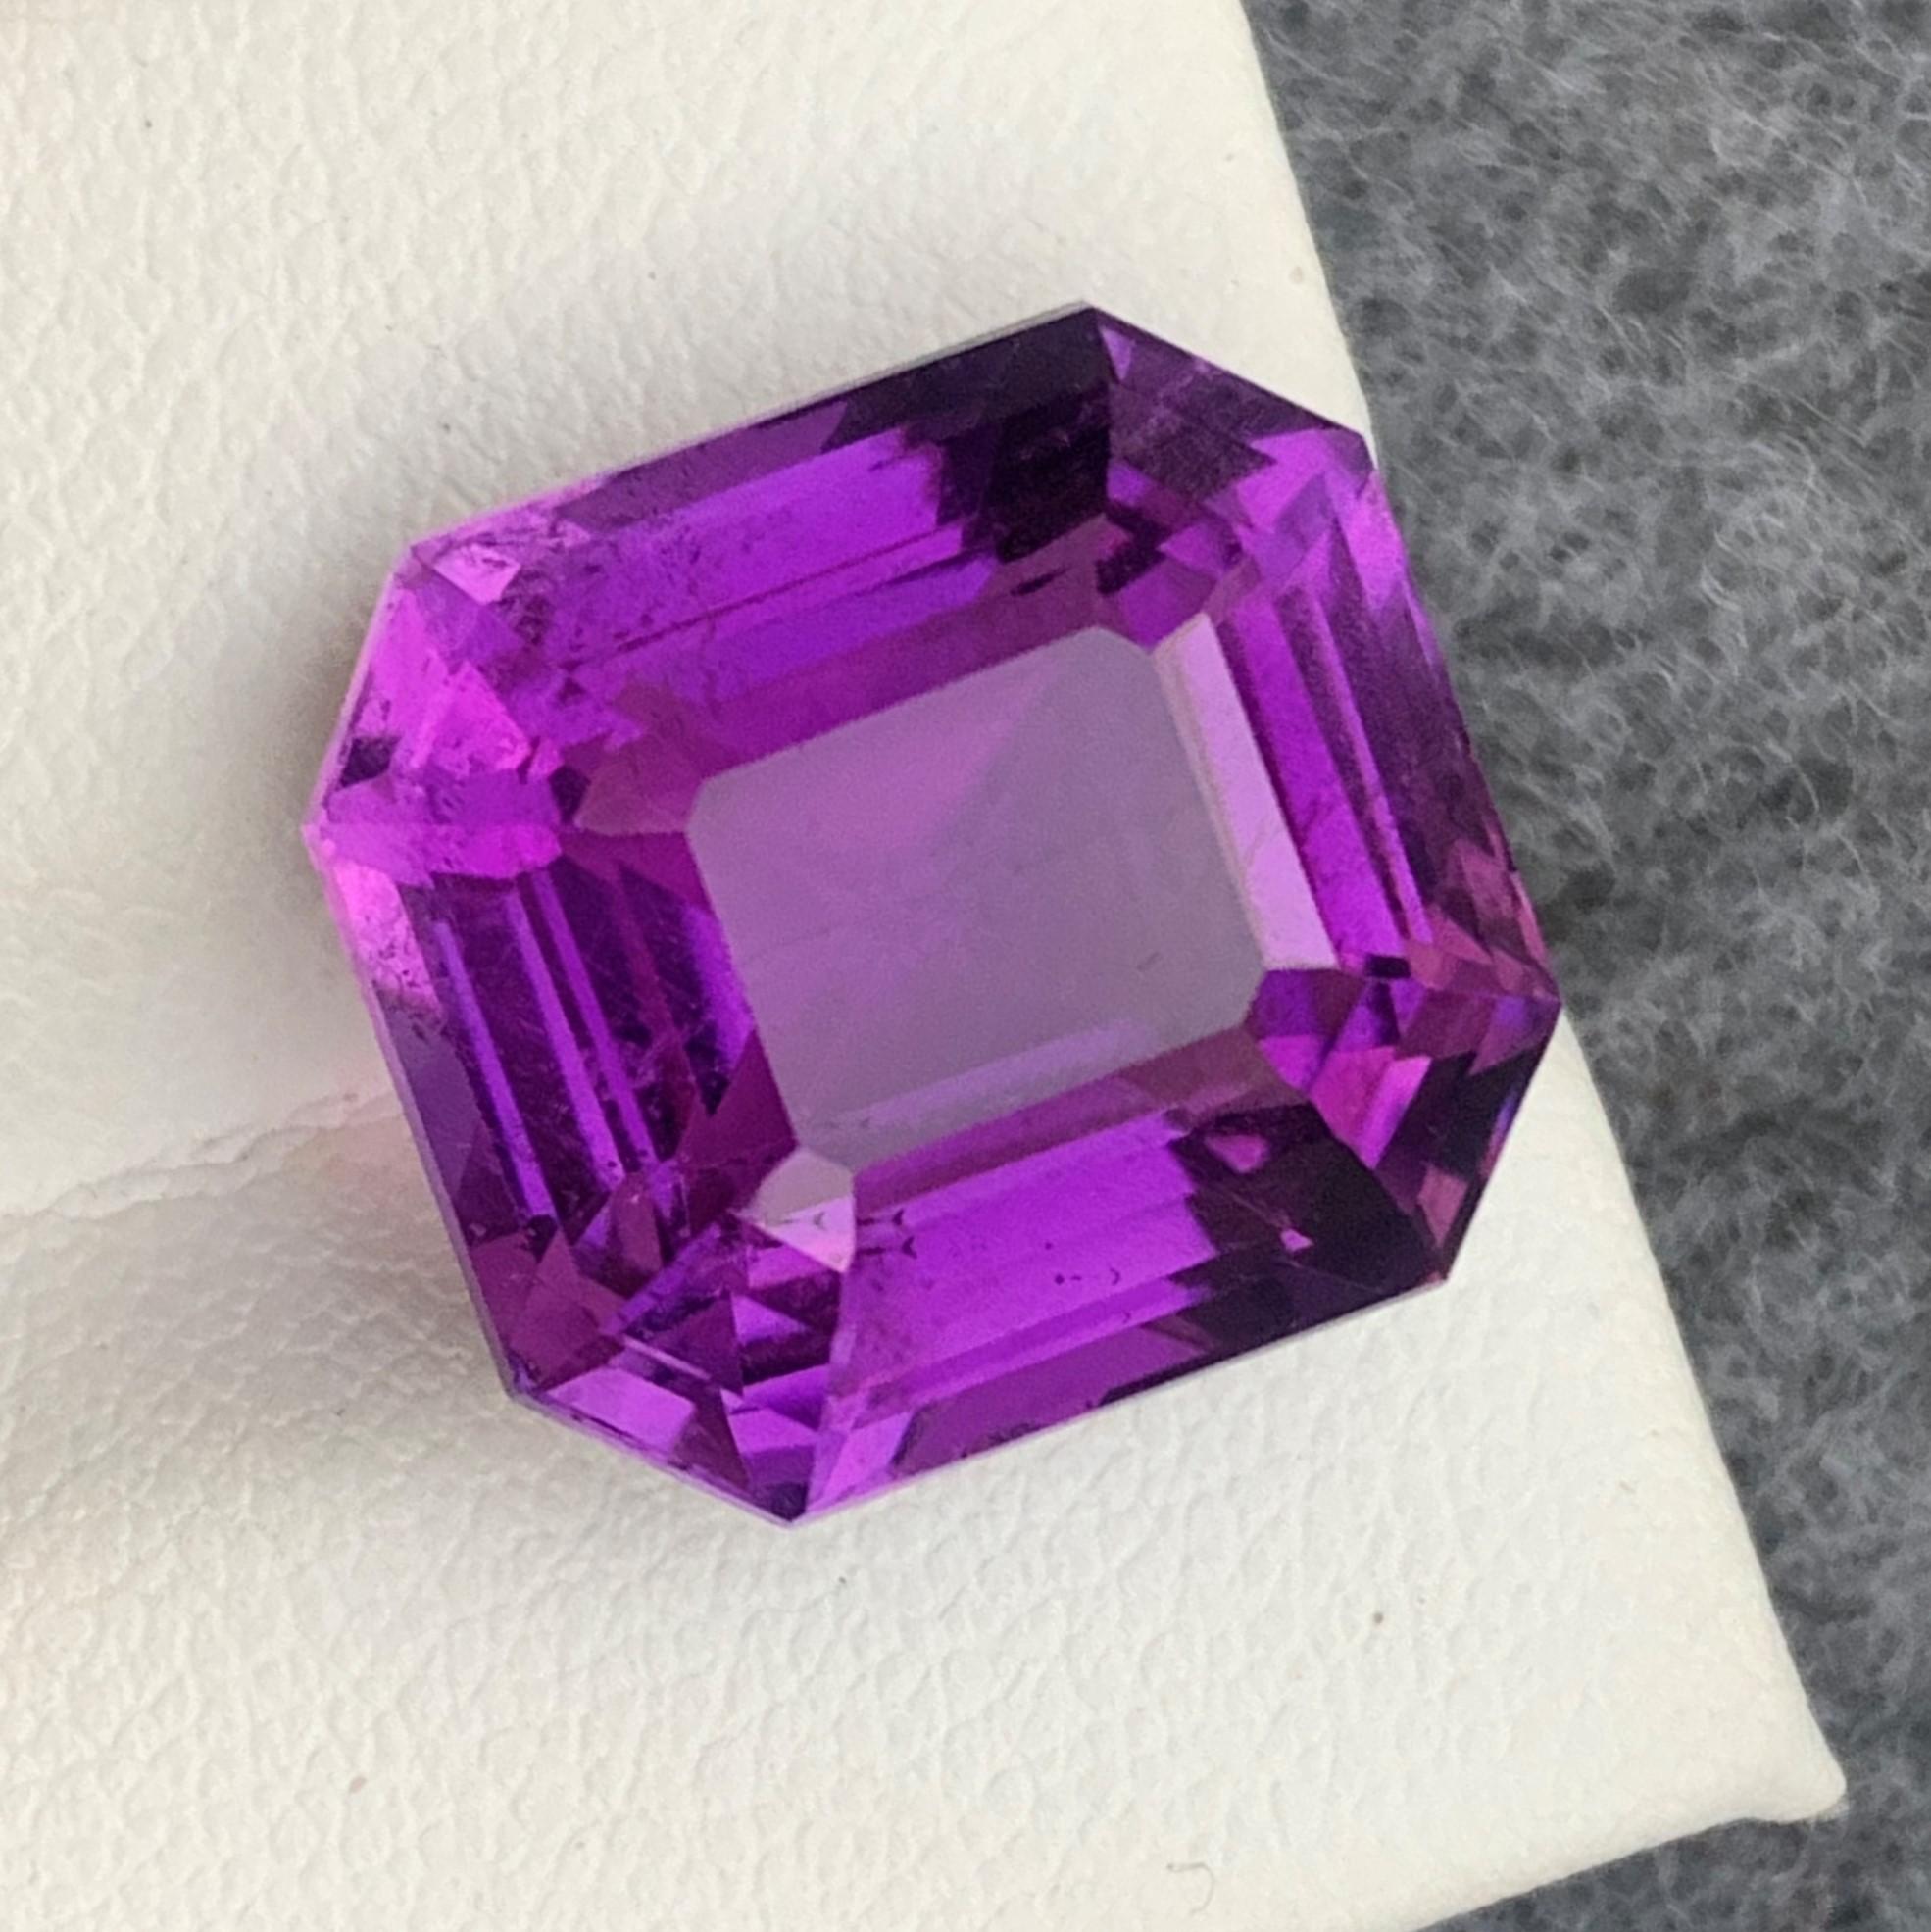 Gemstone Type : Amethyst
Weight : 13.50 Carats
Dimensions : 16.2x13x9.7 mm
Clarity : SI
Origin : Brazil
Color: Purple
Shape: Emerald Octagon
Certificate: On Demand
Month: February
Purported amethyst powers for healing
enhancing the immune